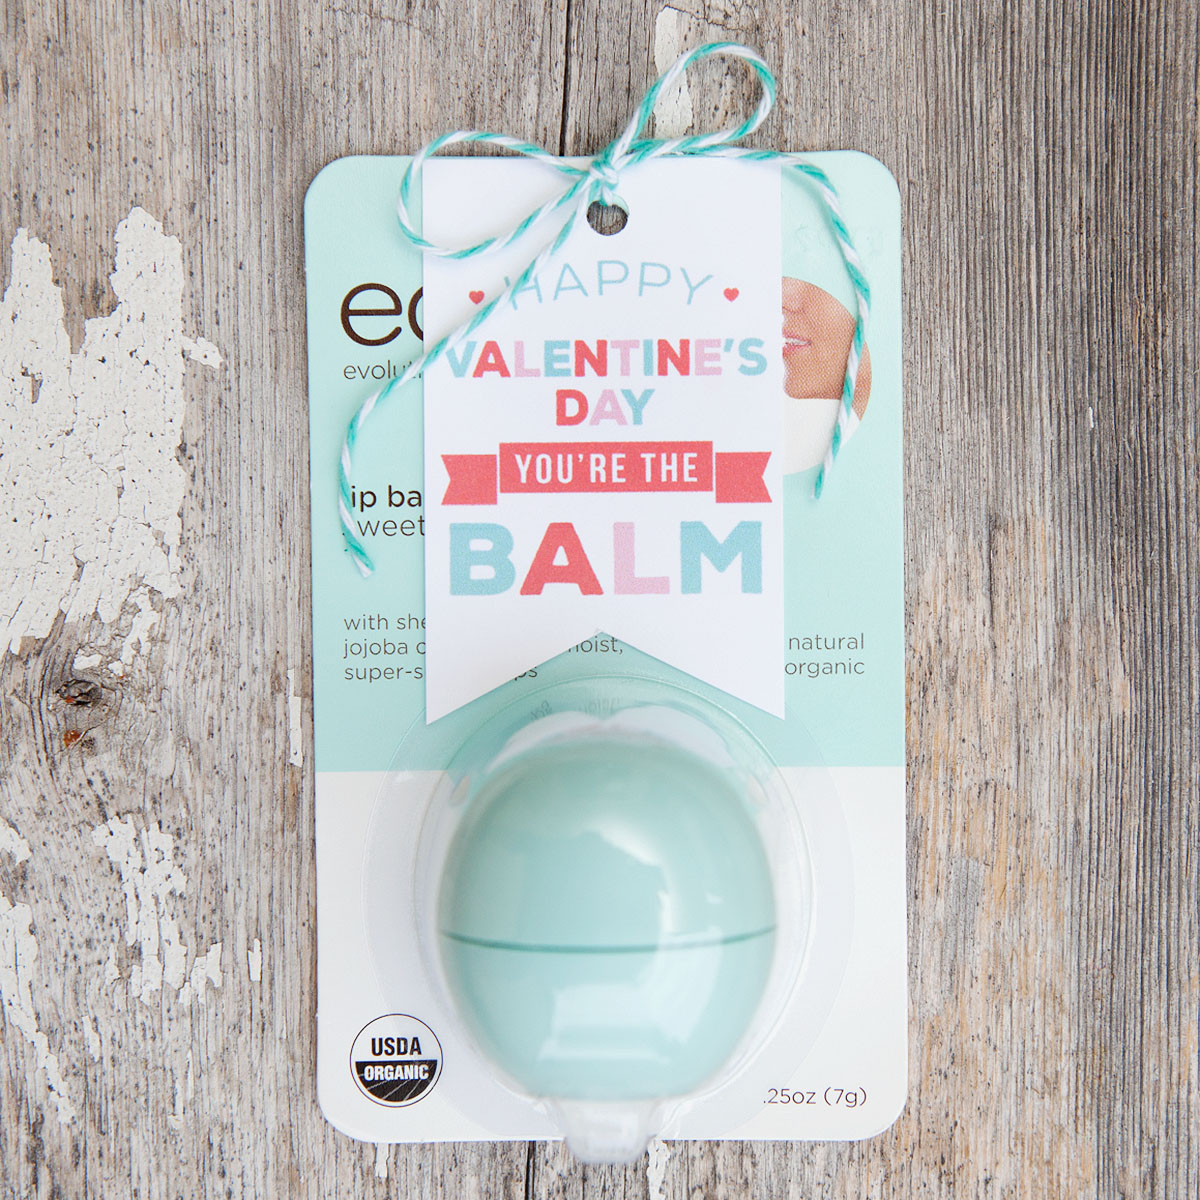 Turn those popular EOS lip balms into fun little Valentine's Day gifts using a short list of supplies and these free printable tags! Makes the perfect gift for friends, teachers and more on your list this Valentine’s Day! 